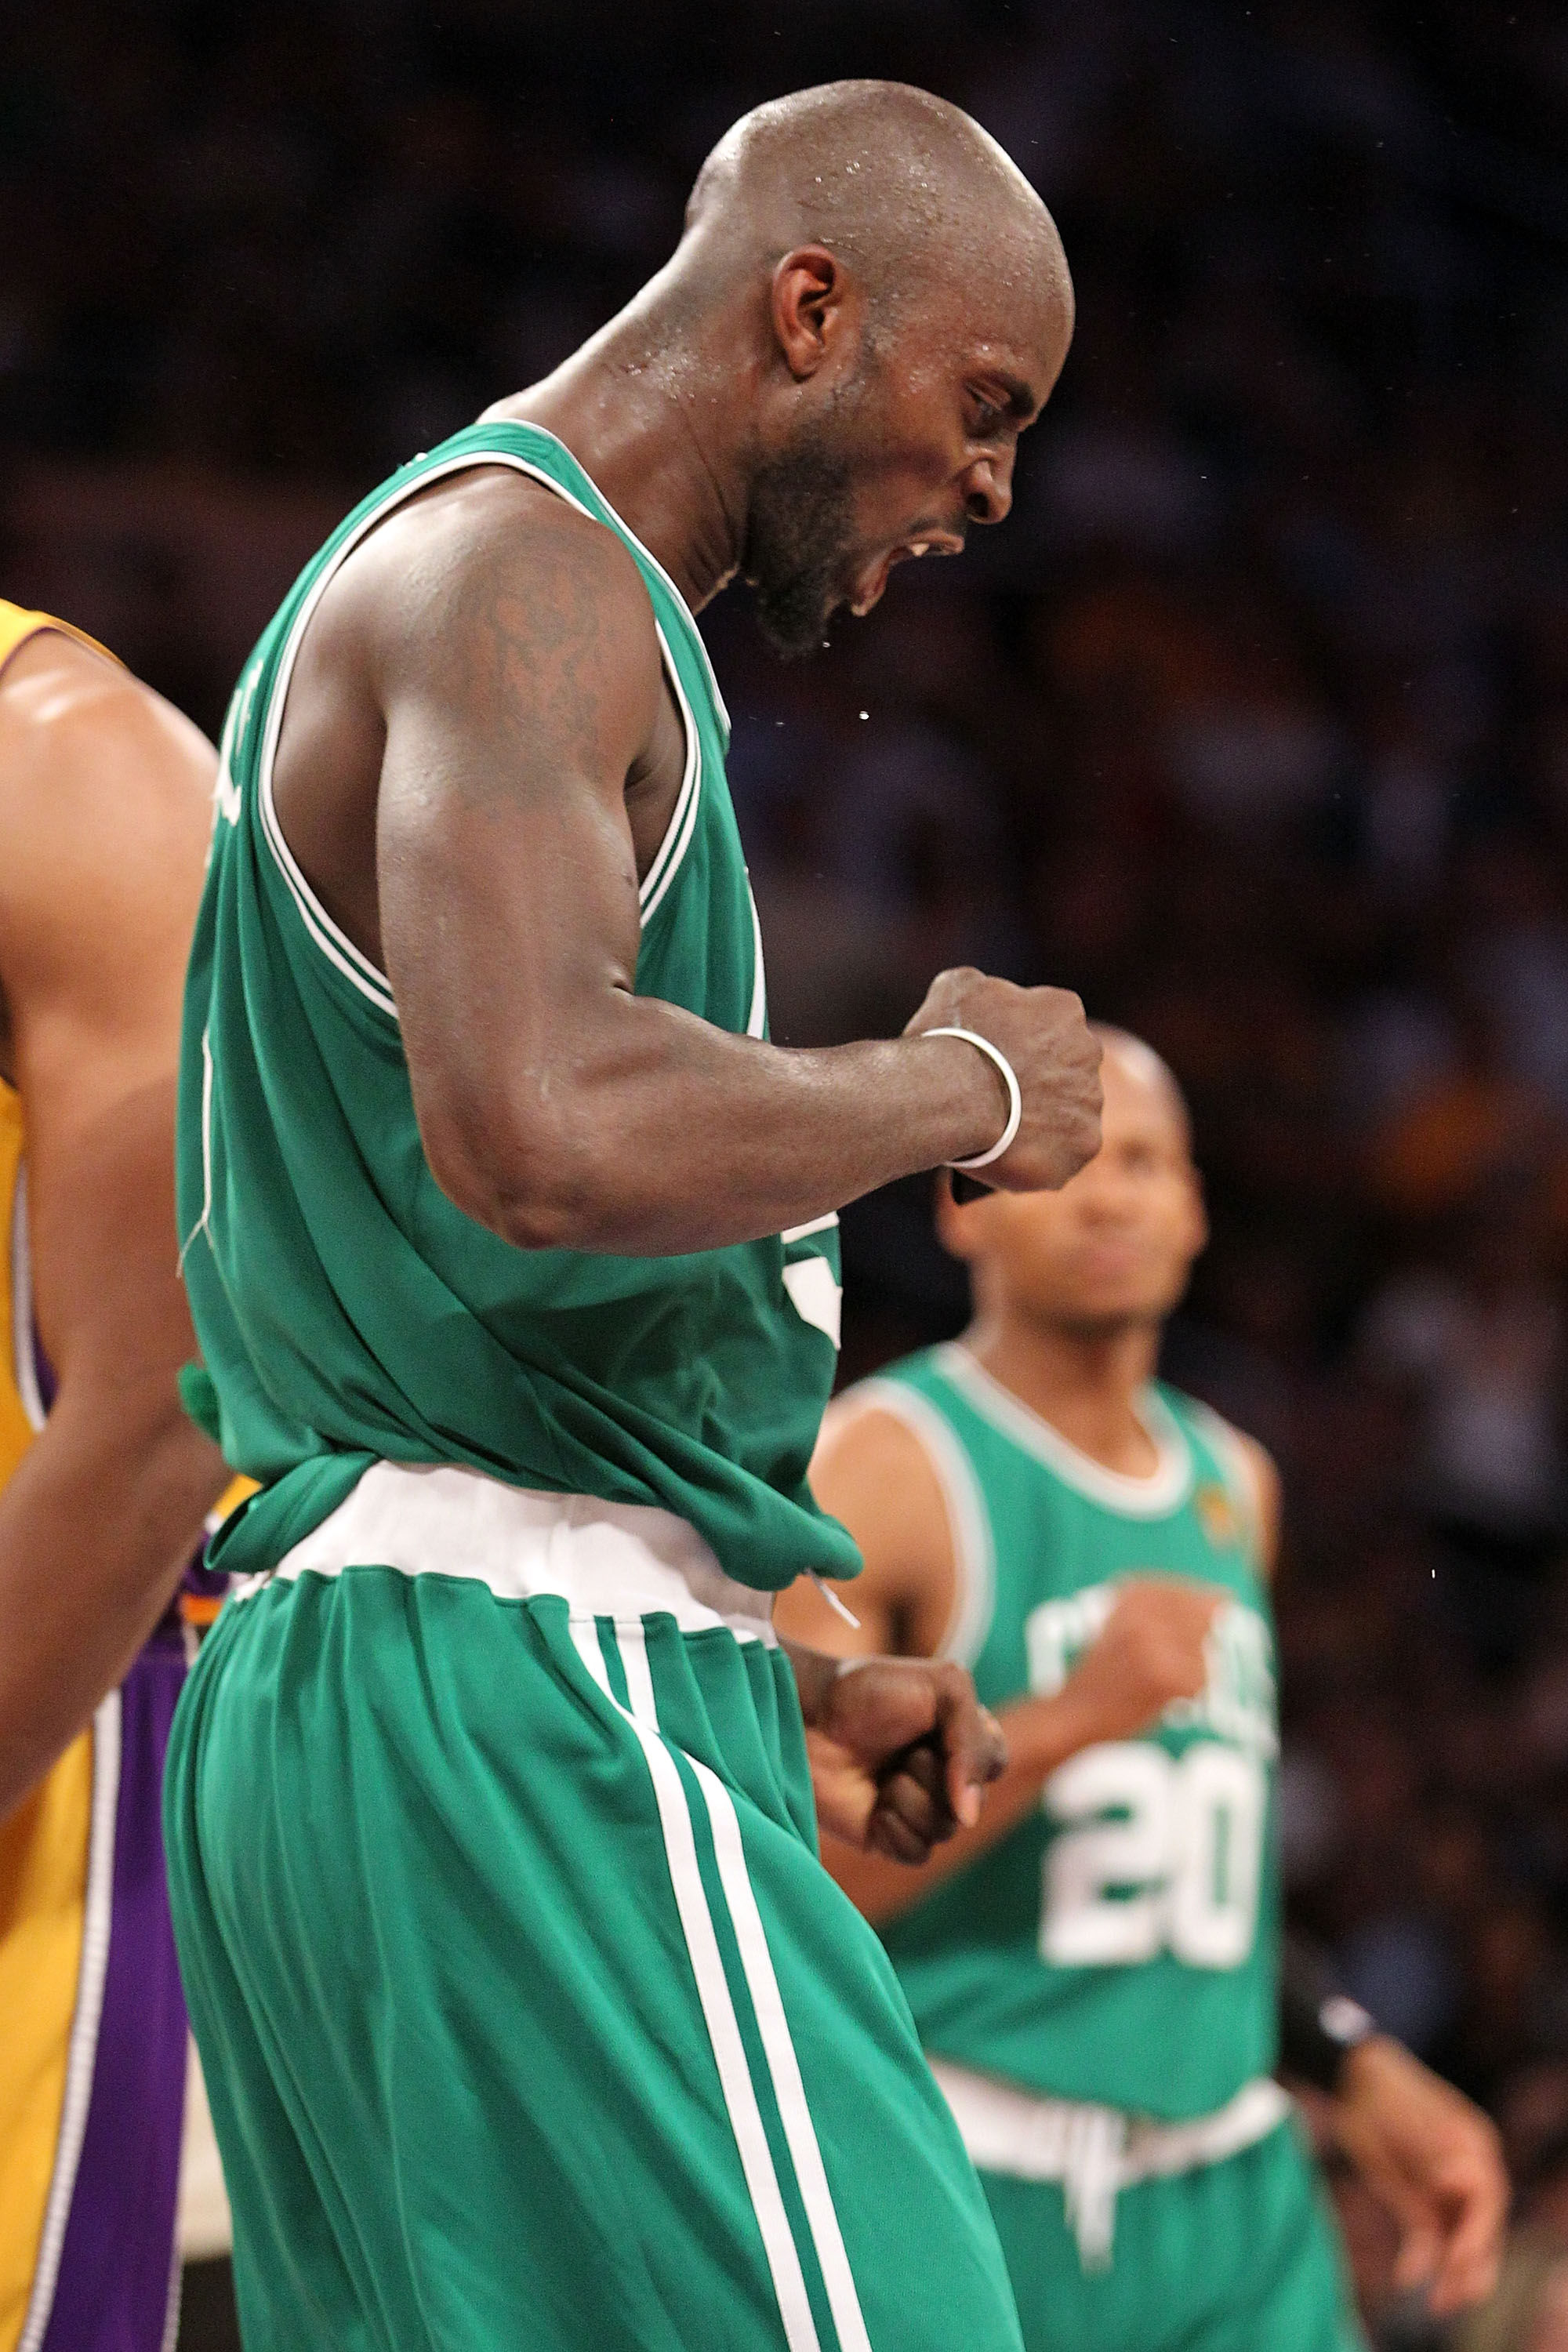 LOS ANGELES, CA - JUNE 17:  Kevin Garnett #5 of the Boston Celtics reacts in the second half against the Los Angeles Lakers in Game Seven of the 2010 NBA Finals at Staples Center on June 17, 2010 in Los Angeles, California.  NOTE TO USER: User expressly a